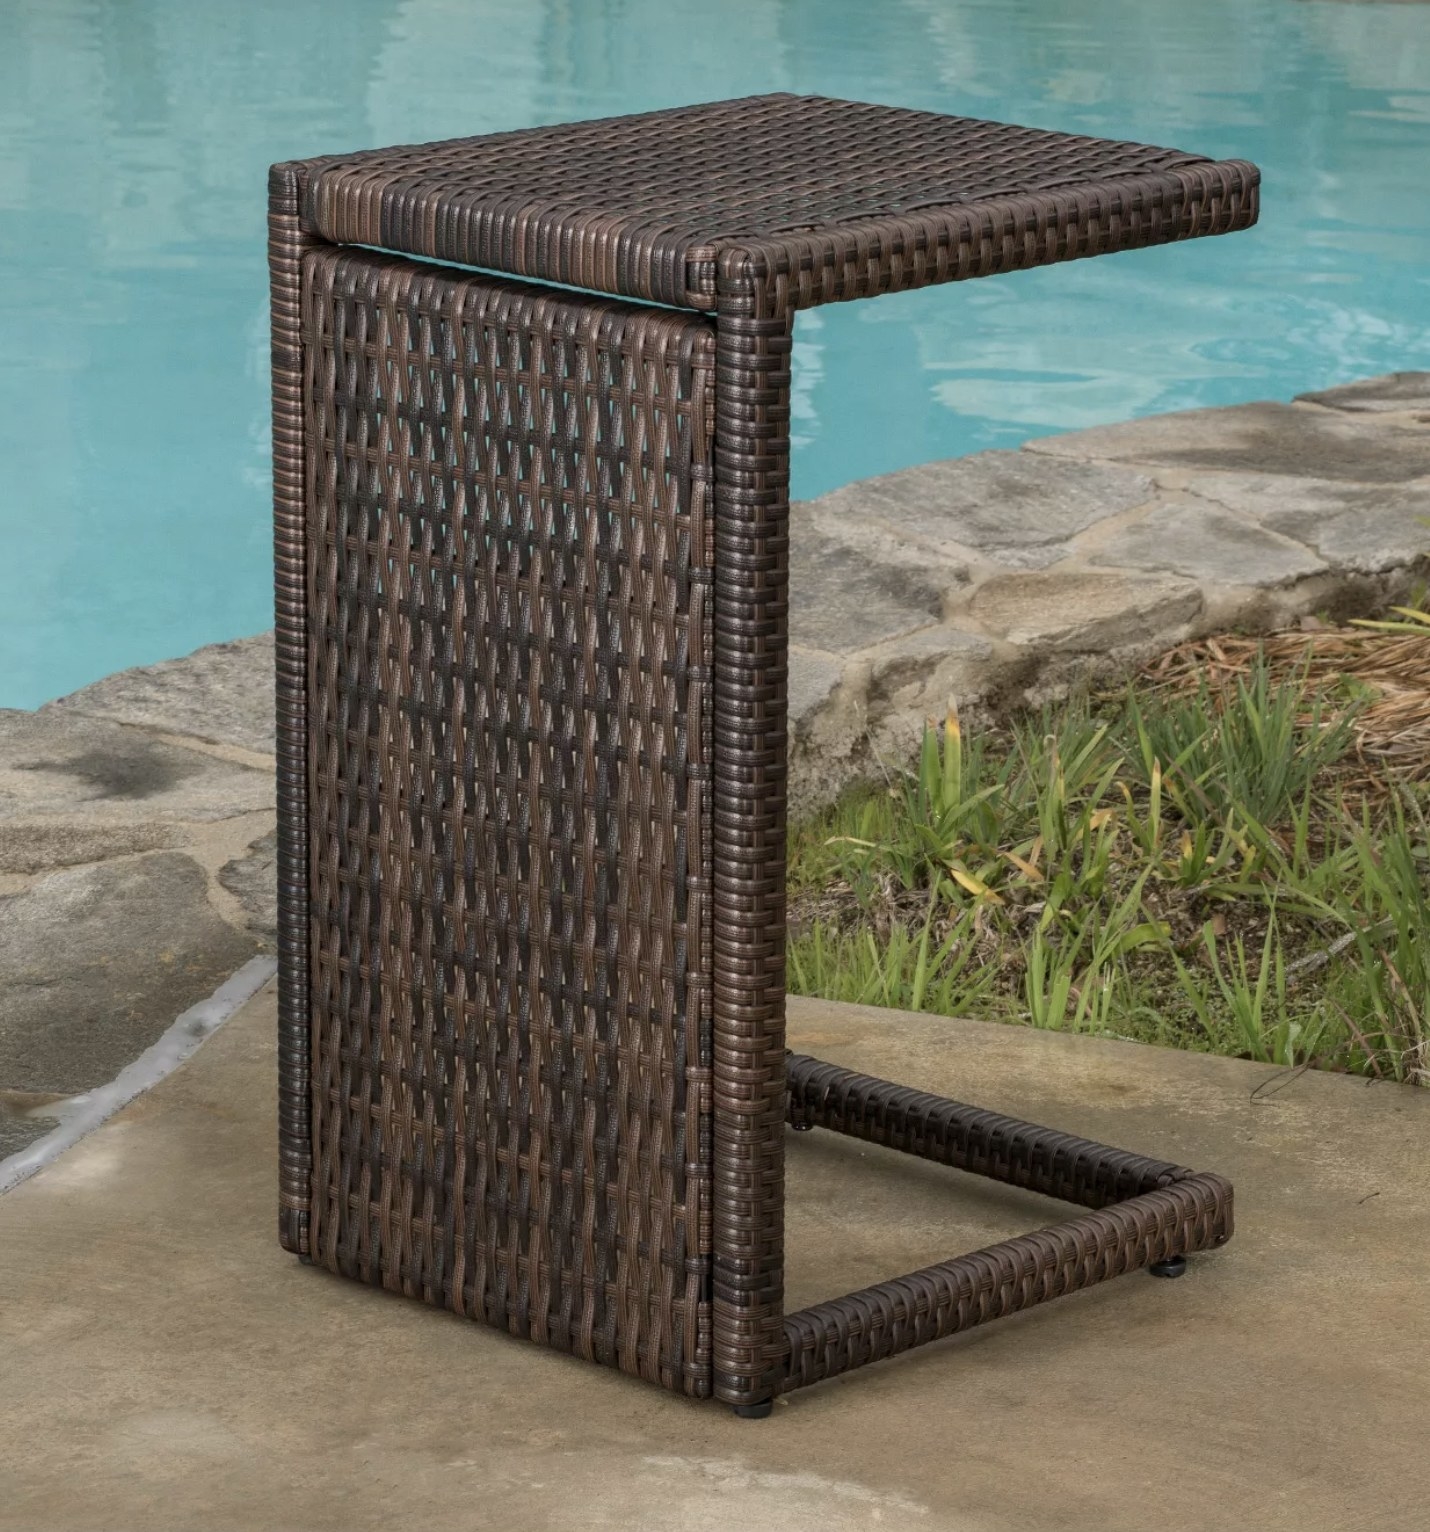 A brown, wicker, c-shaped end table by a pool